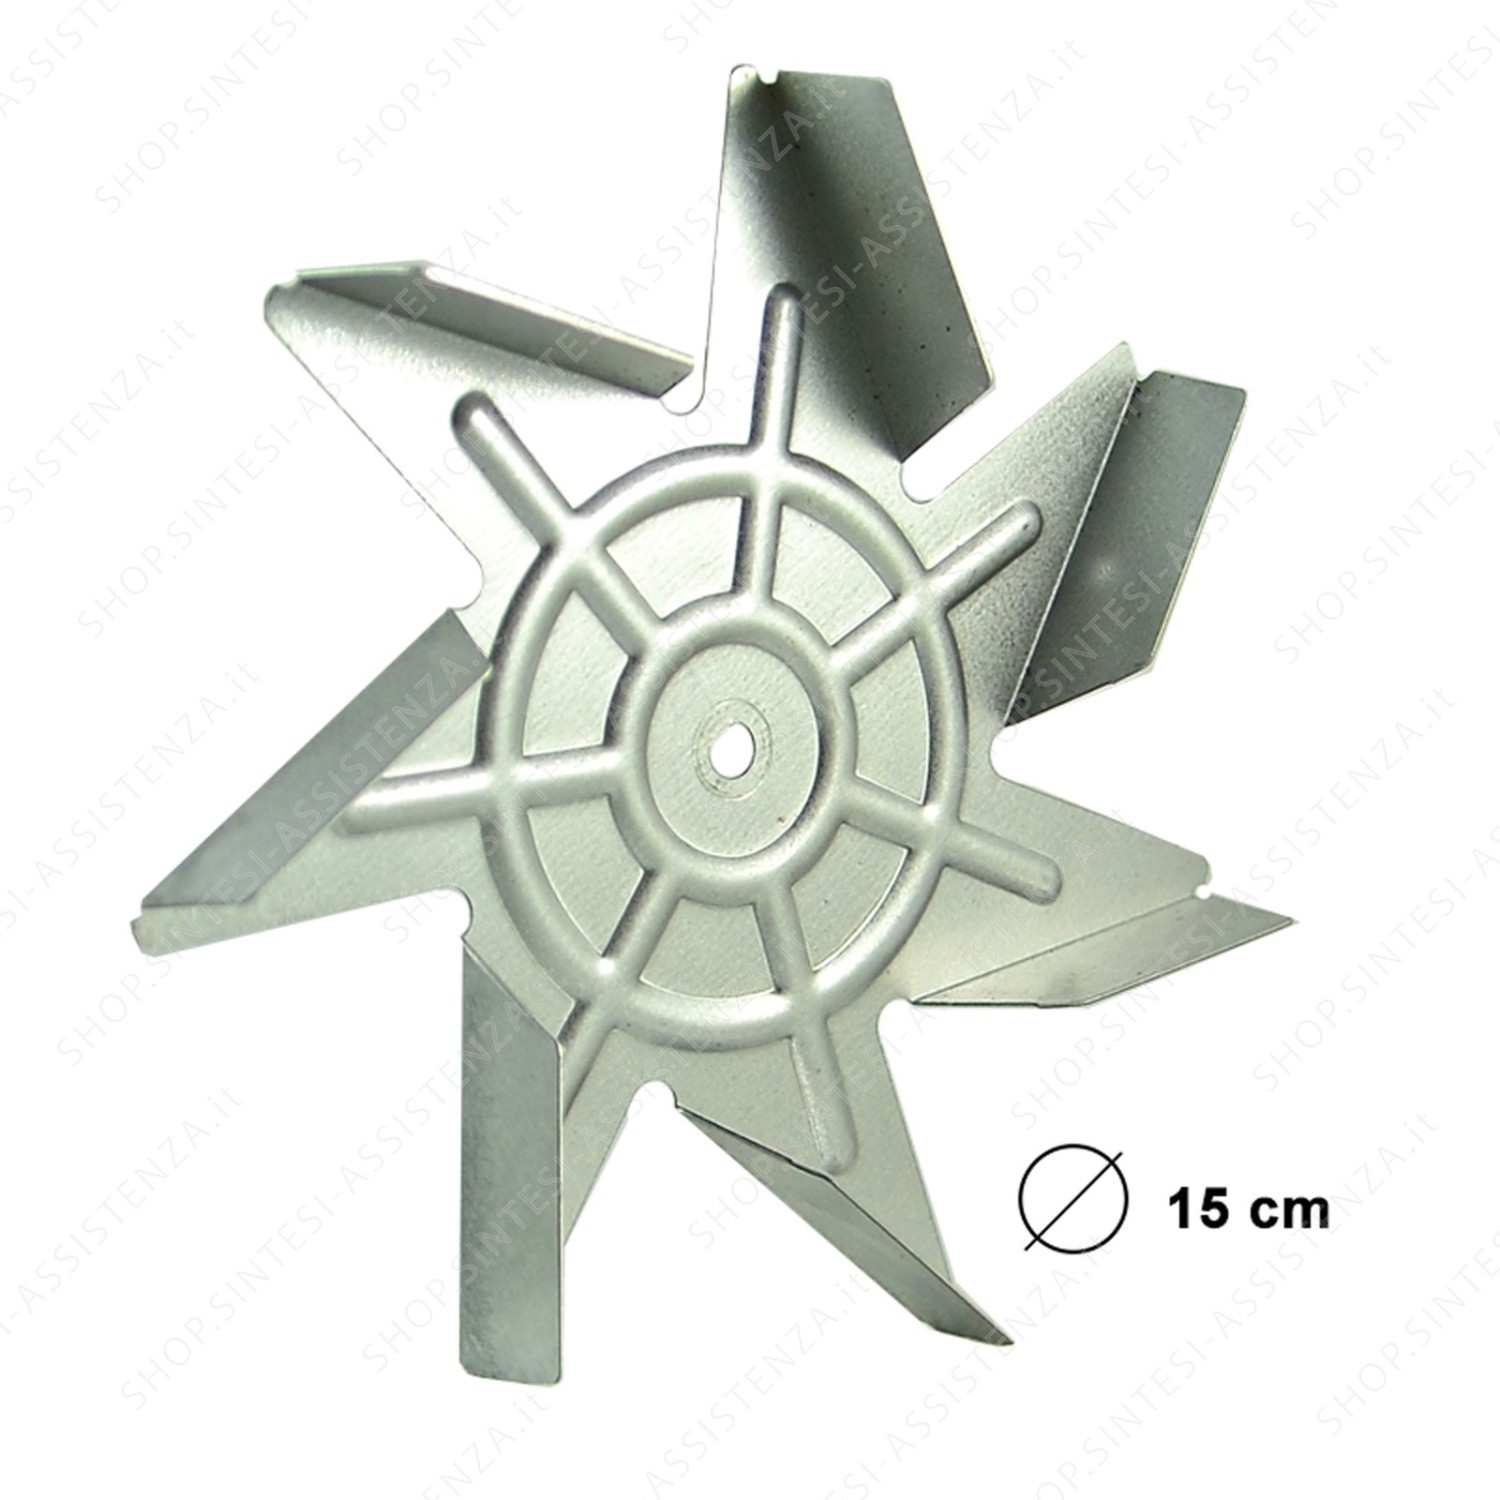 FAN 7 BLADES HEIGHT 20 MM FOR SMEG VENTILATED MOTOR - 039290137 S